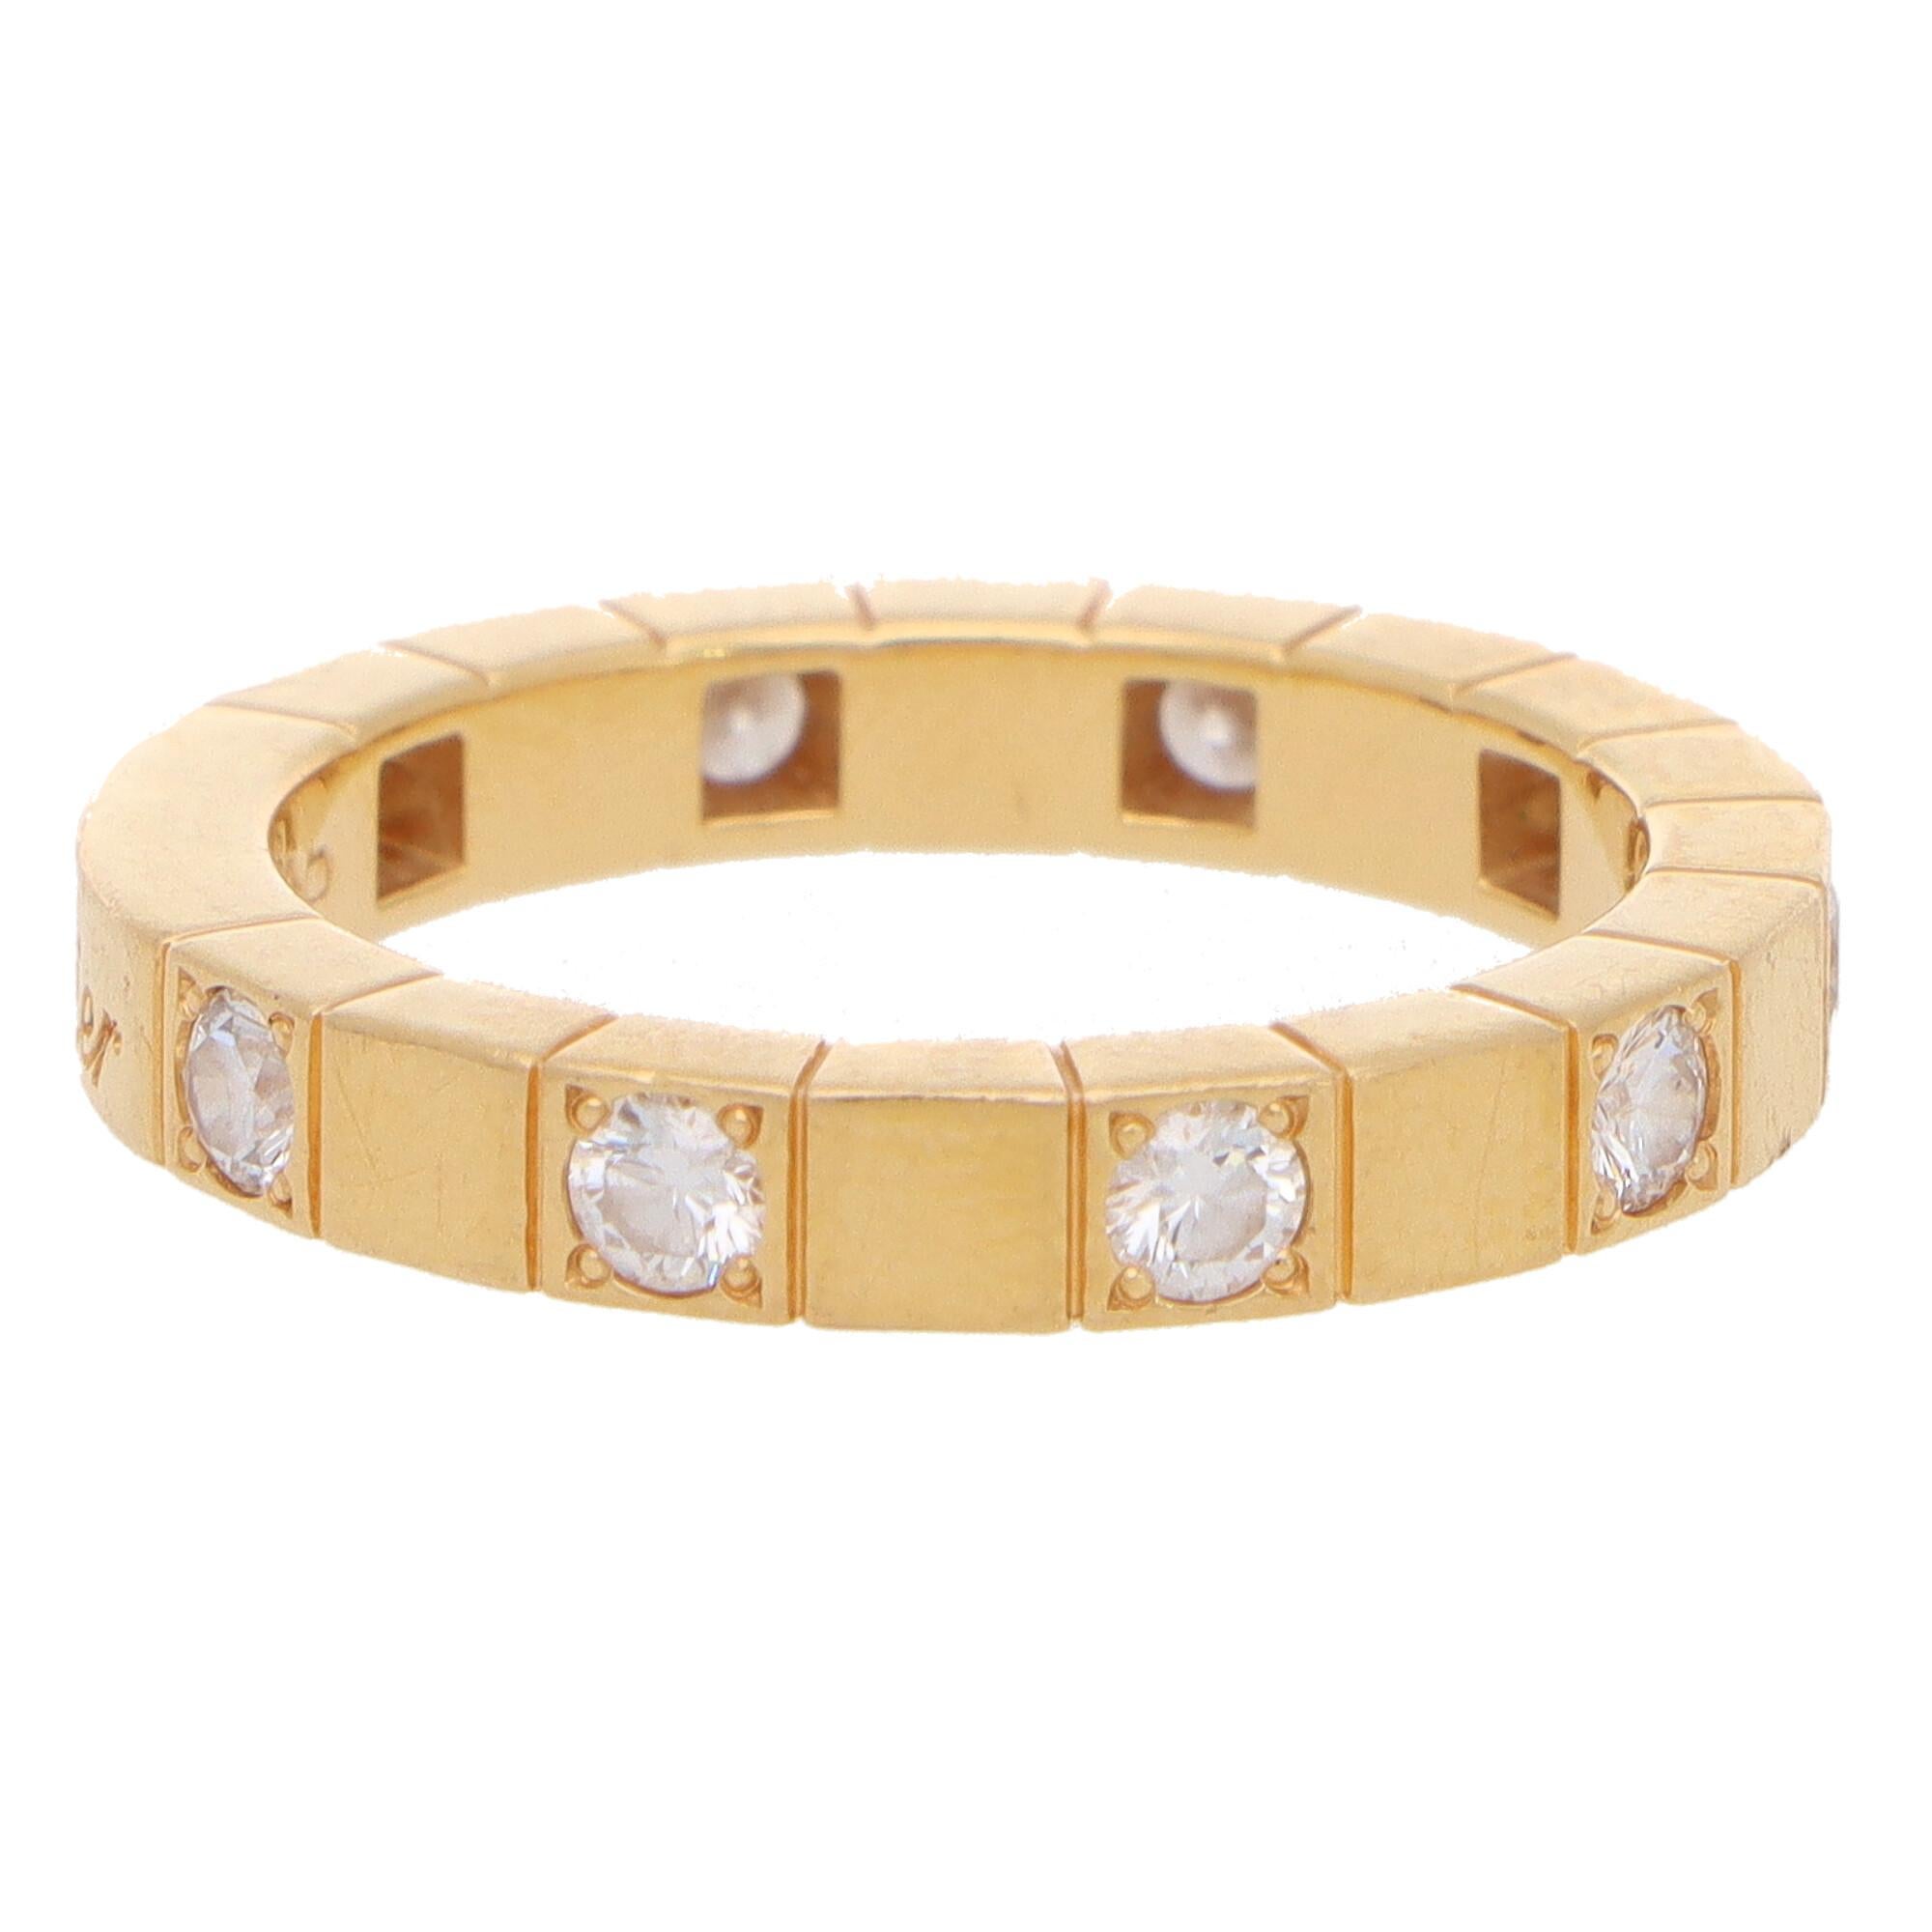 Round Cut Vintage Cartier Lanières Diamond Eternity Band Ring Set in 18k Yellow Gold